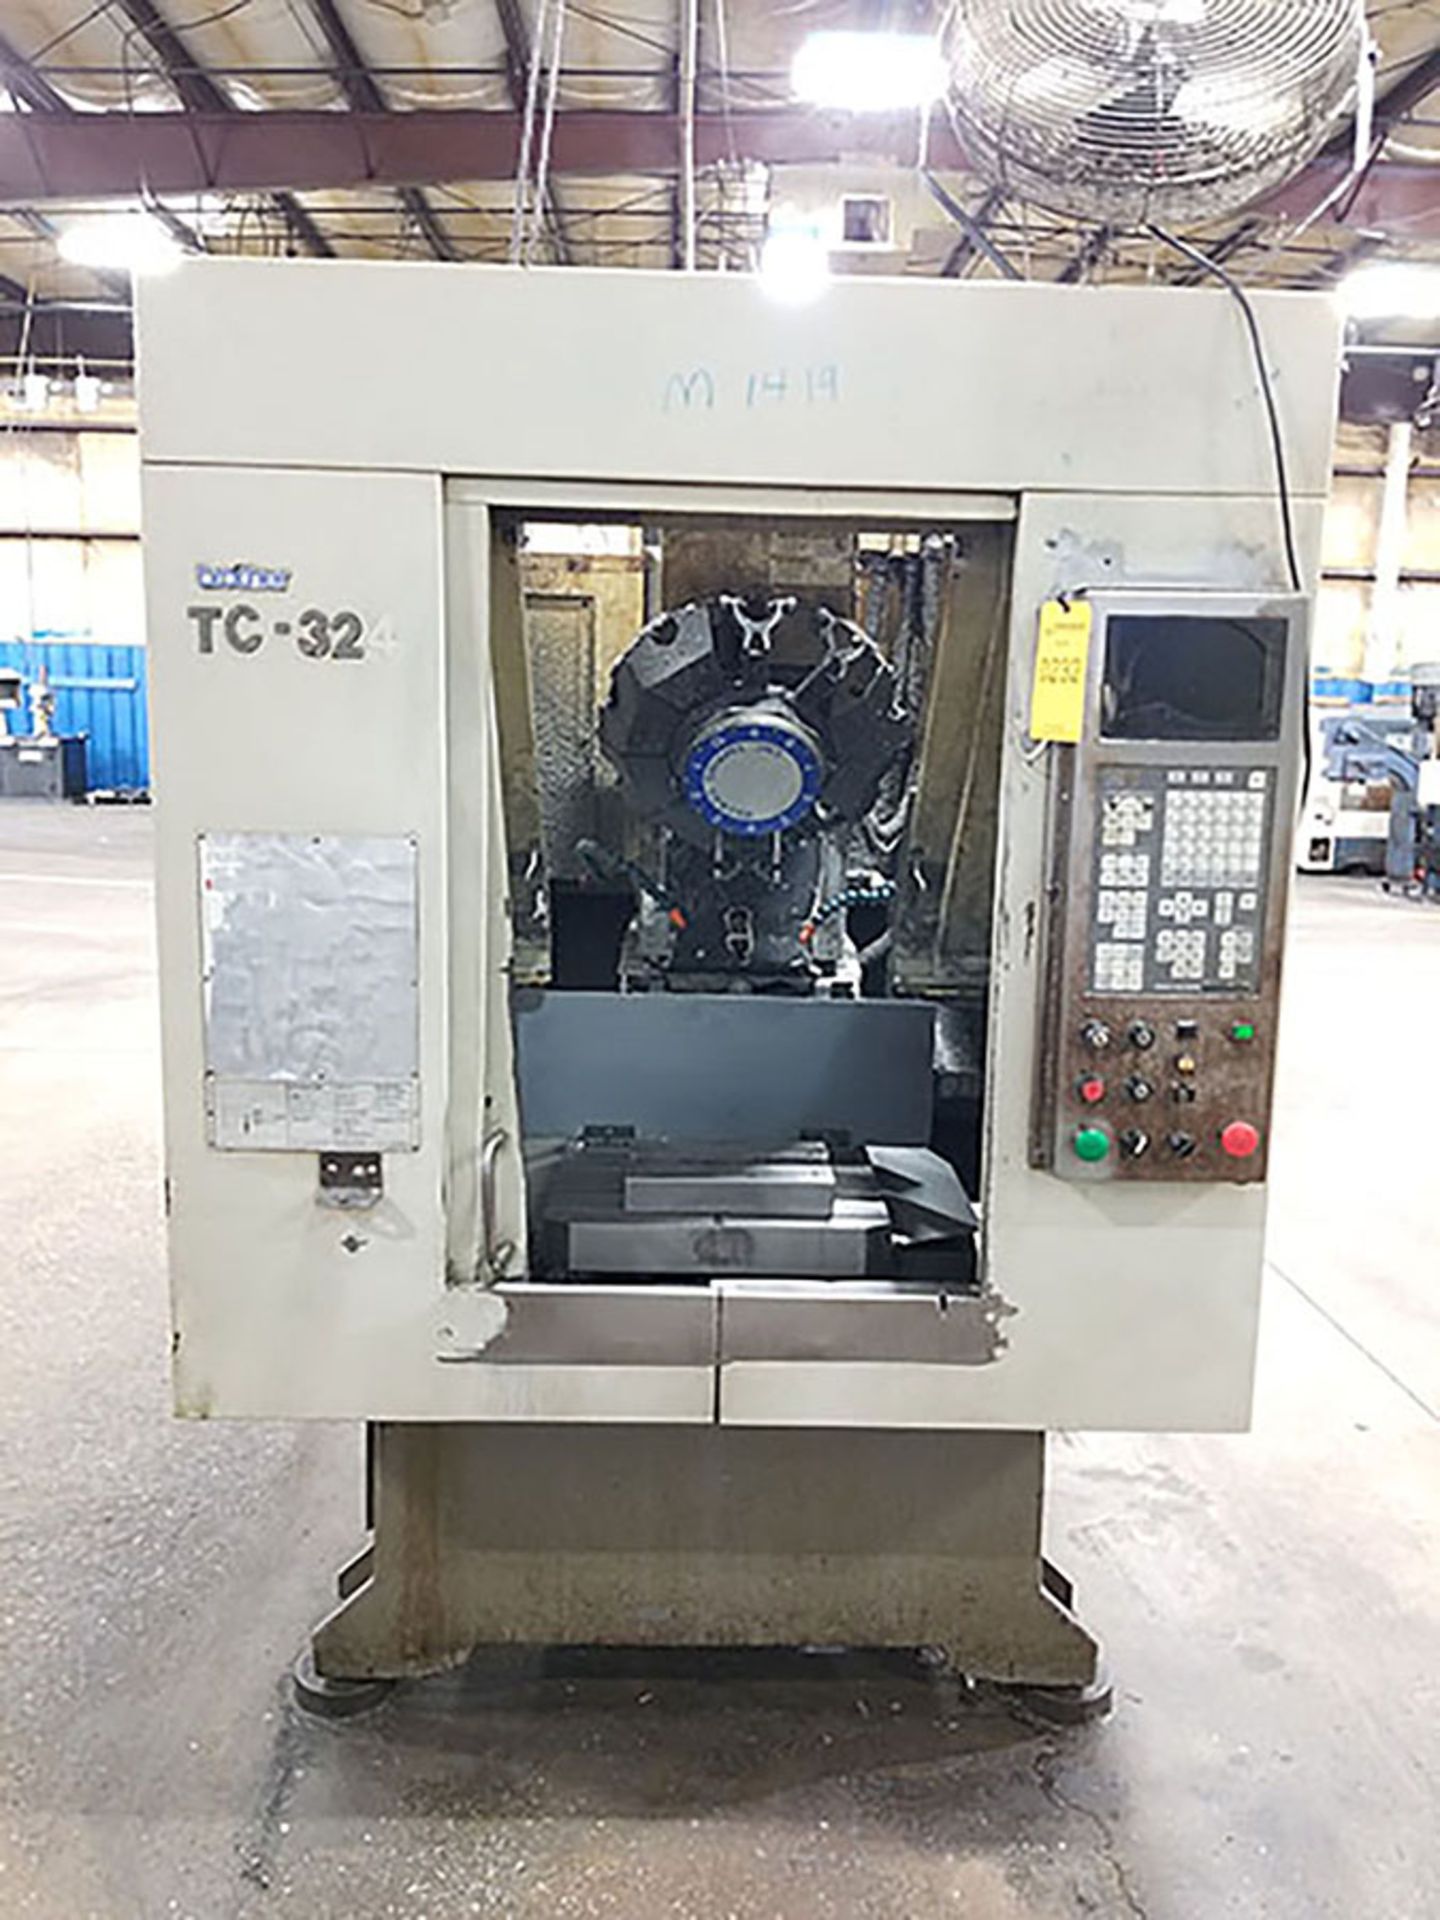 1996 BROTHER TC-324N CNC D&T CENTER; 10-POSITON TURRET, DUAL PALLET ROTARY TABLE, COOLANT SYSTEM,